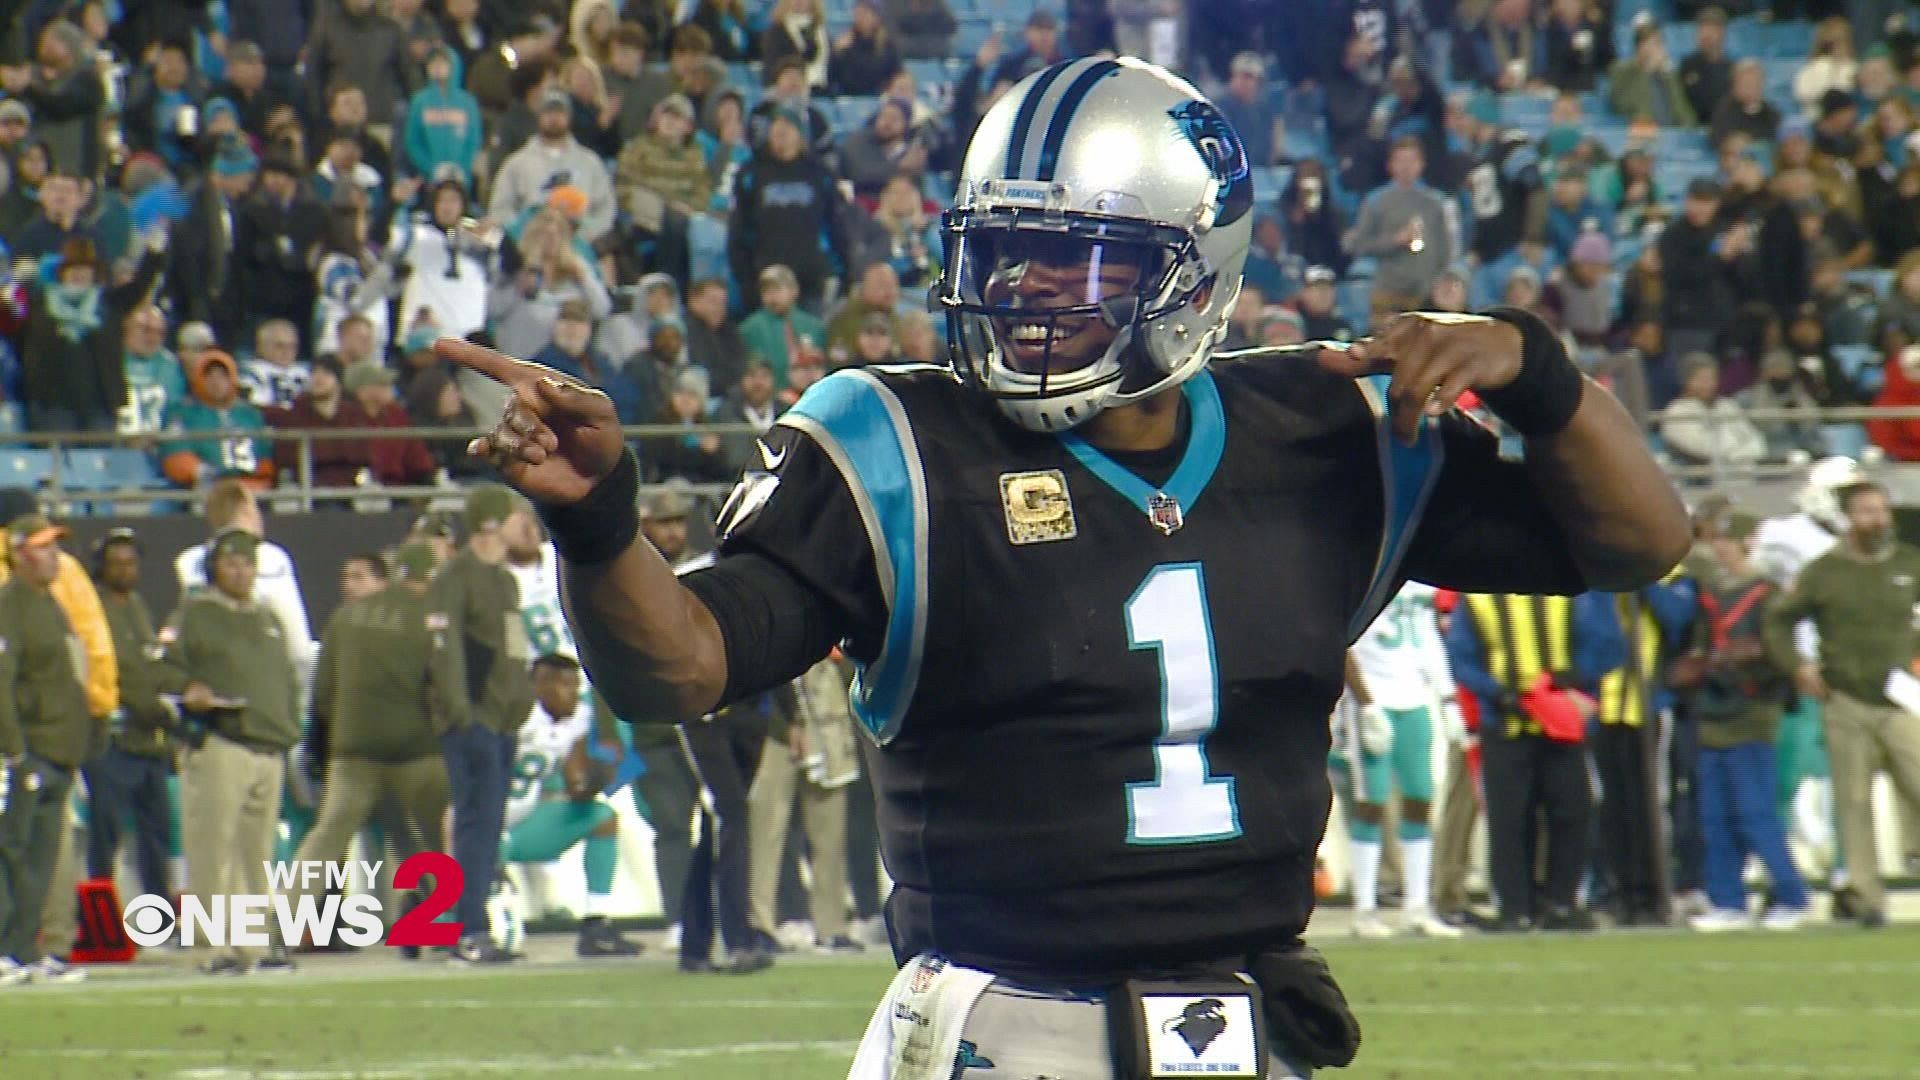 Cam Newton is coming back to Carolina! We caught up with former Panther Ricky Proehl to get his thoughts on the deal.